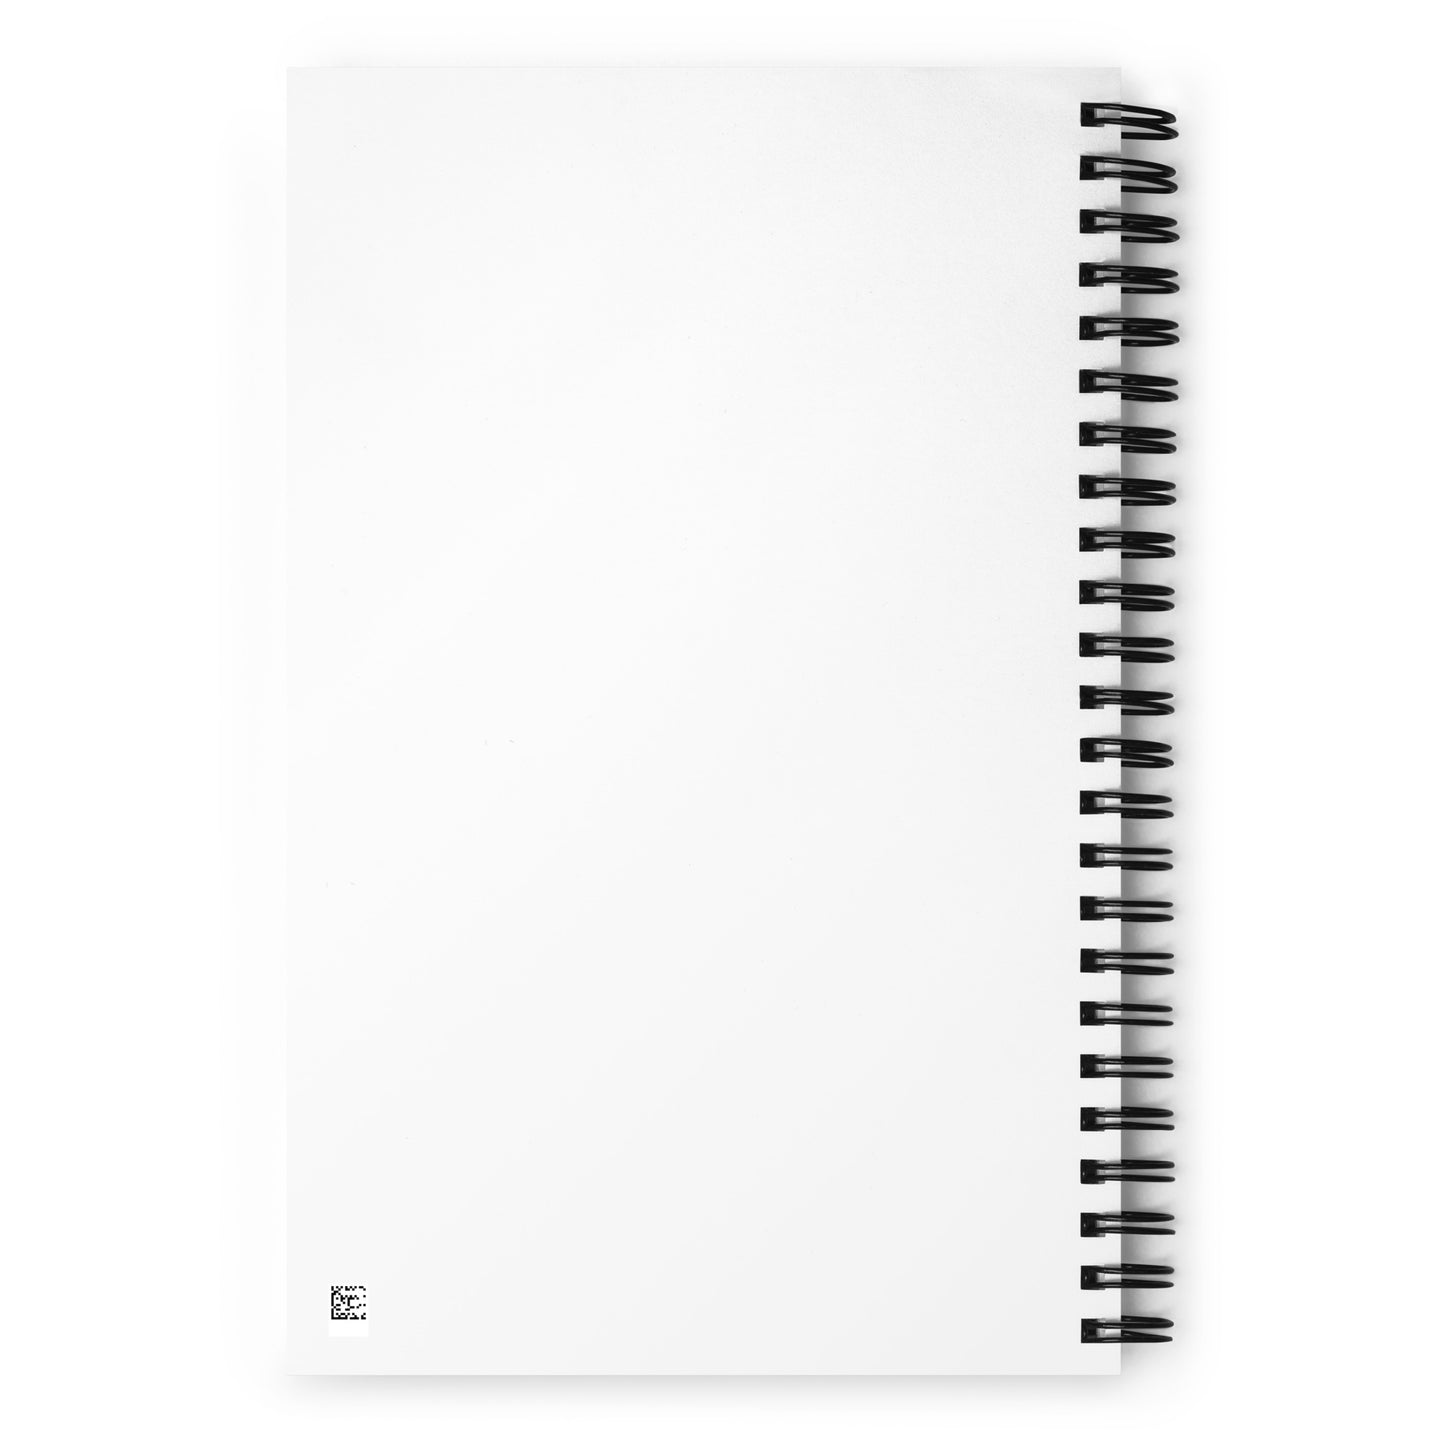 The back of a white wire-bound notebook. The back surface is blank with no decoration.